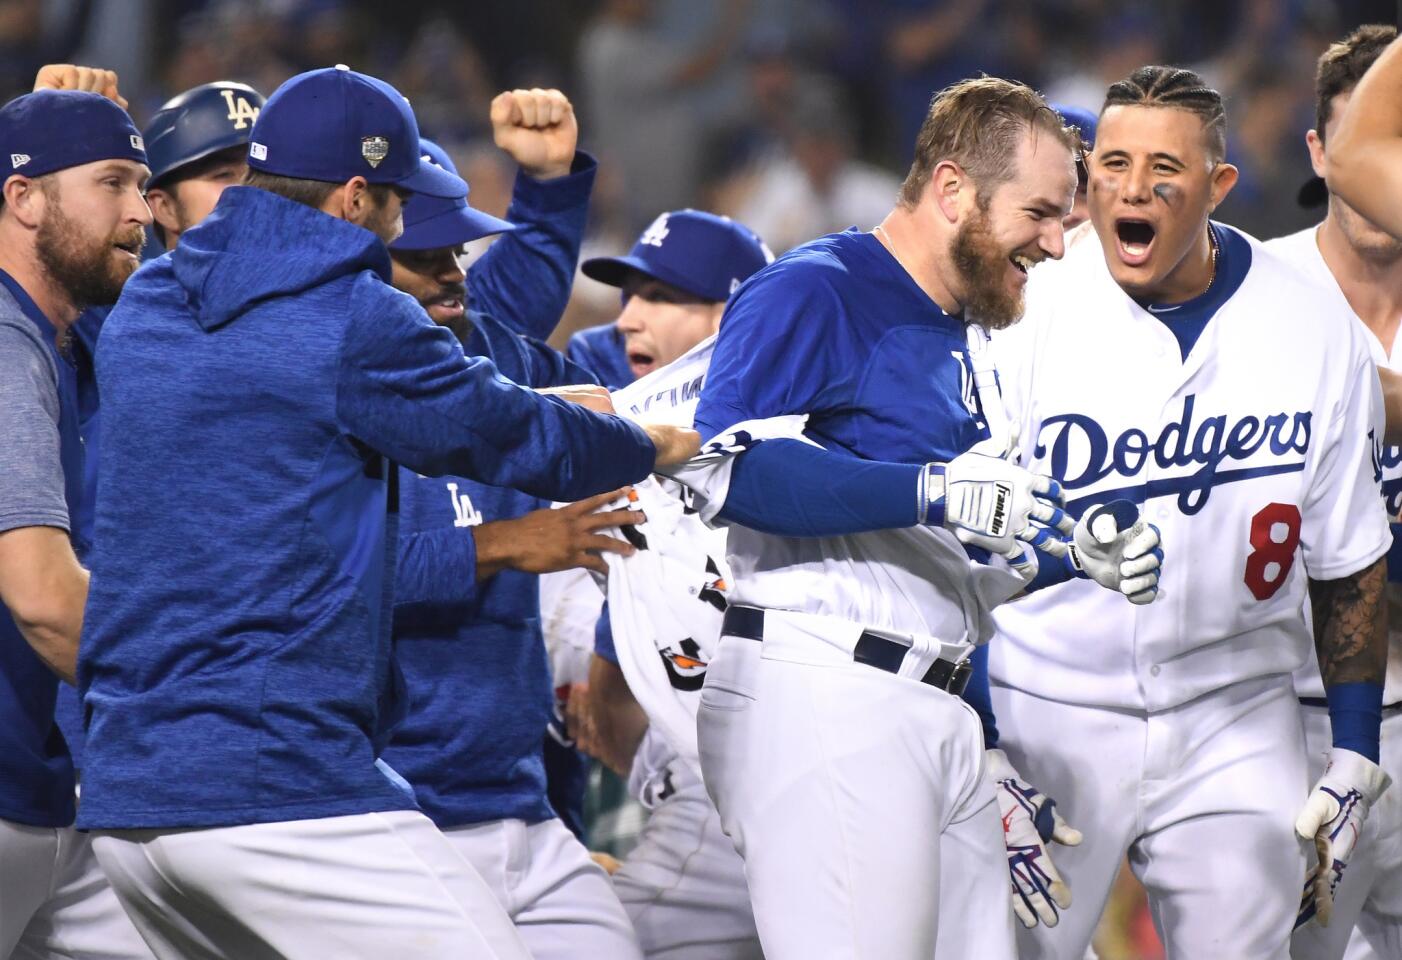 Dodgers Max Muncy, second from right, celebrates his walk-off home run against the Red Sox in the bottom of the 18th inning.